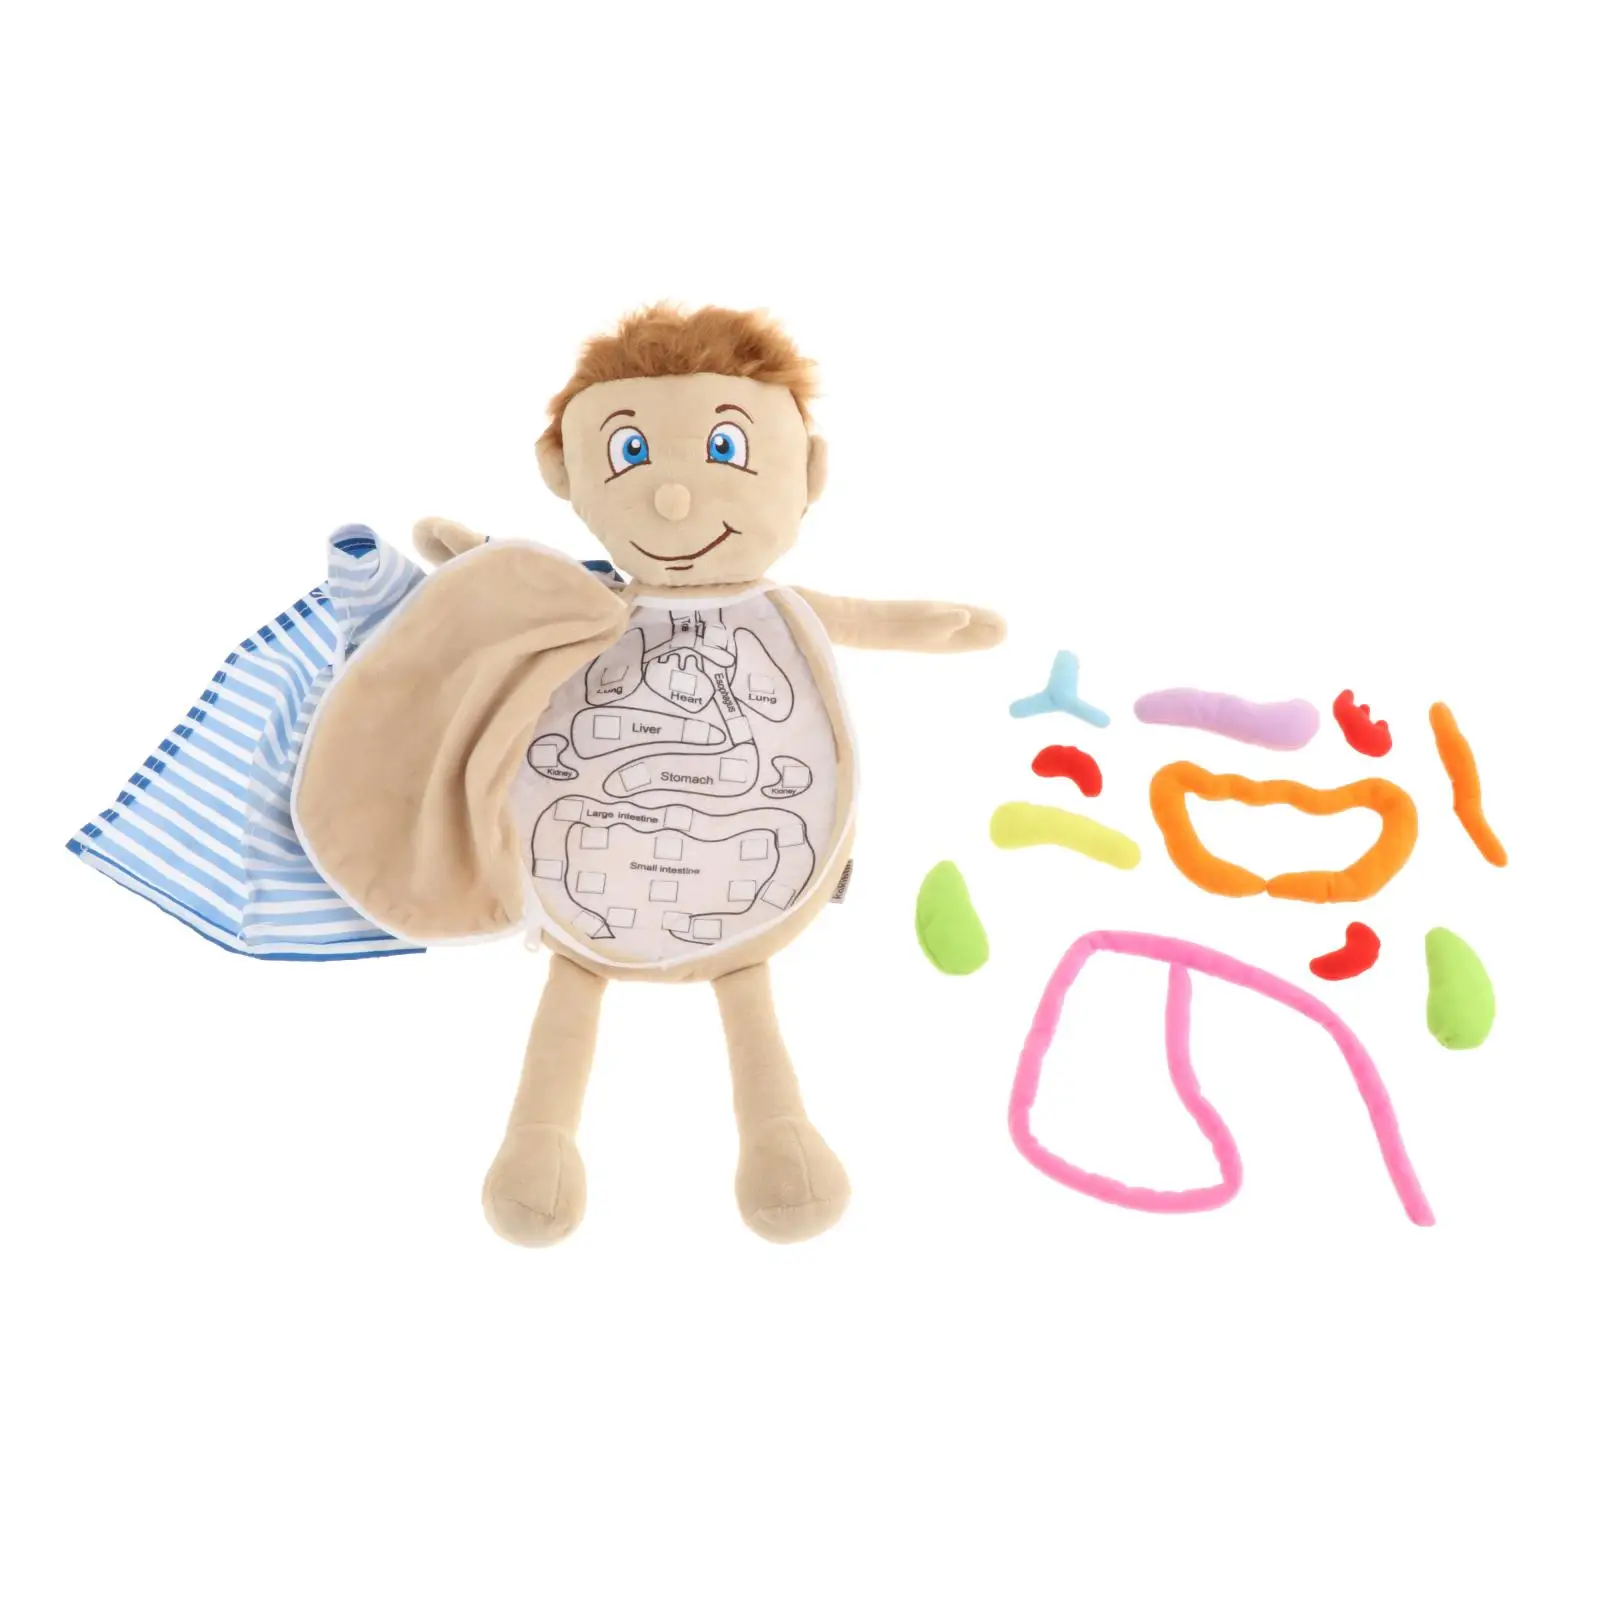 Human Body Anatomy Model 3D Puzzle Teaching Tool Removable Soft Doll Early Education Toys for Kids School Preschool